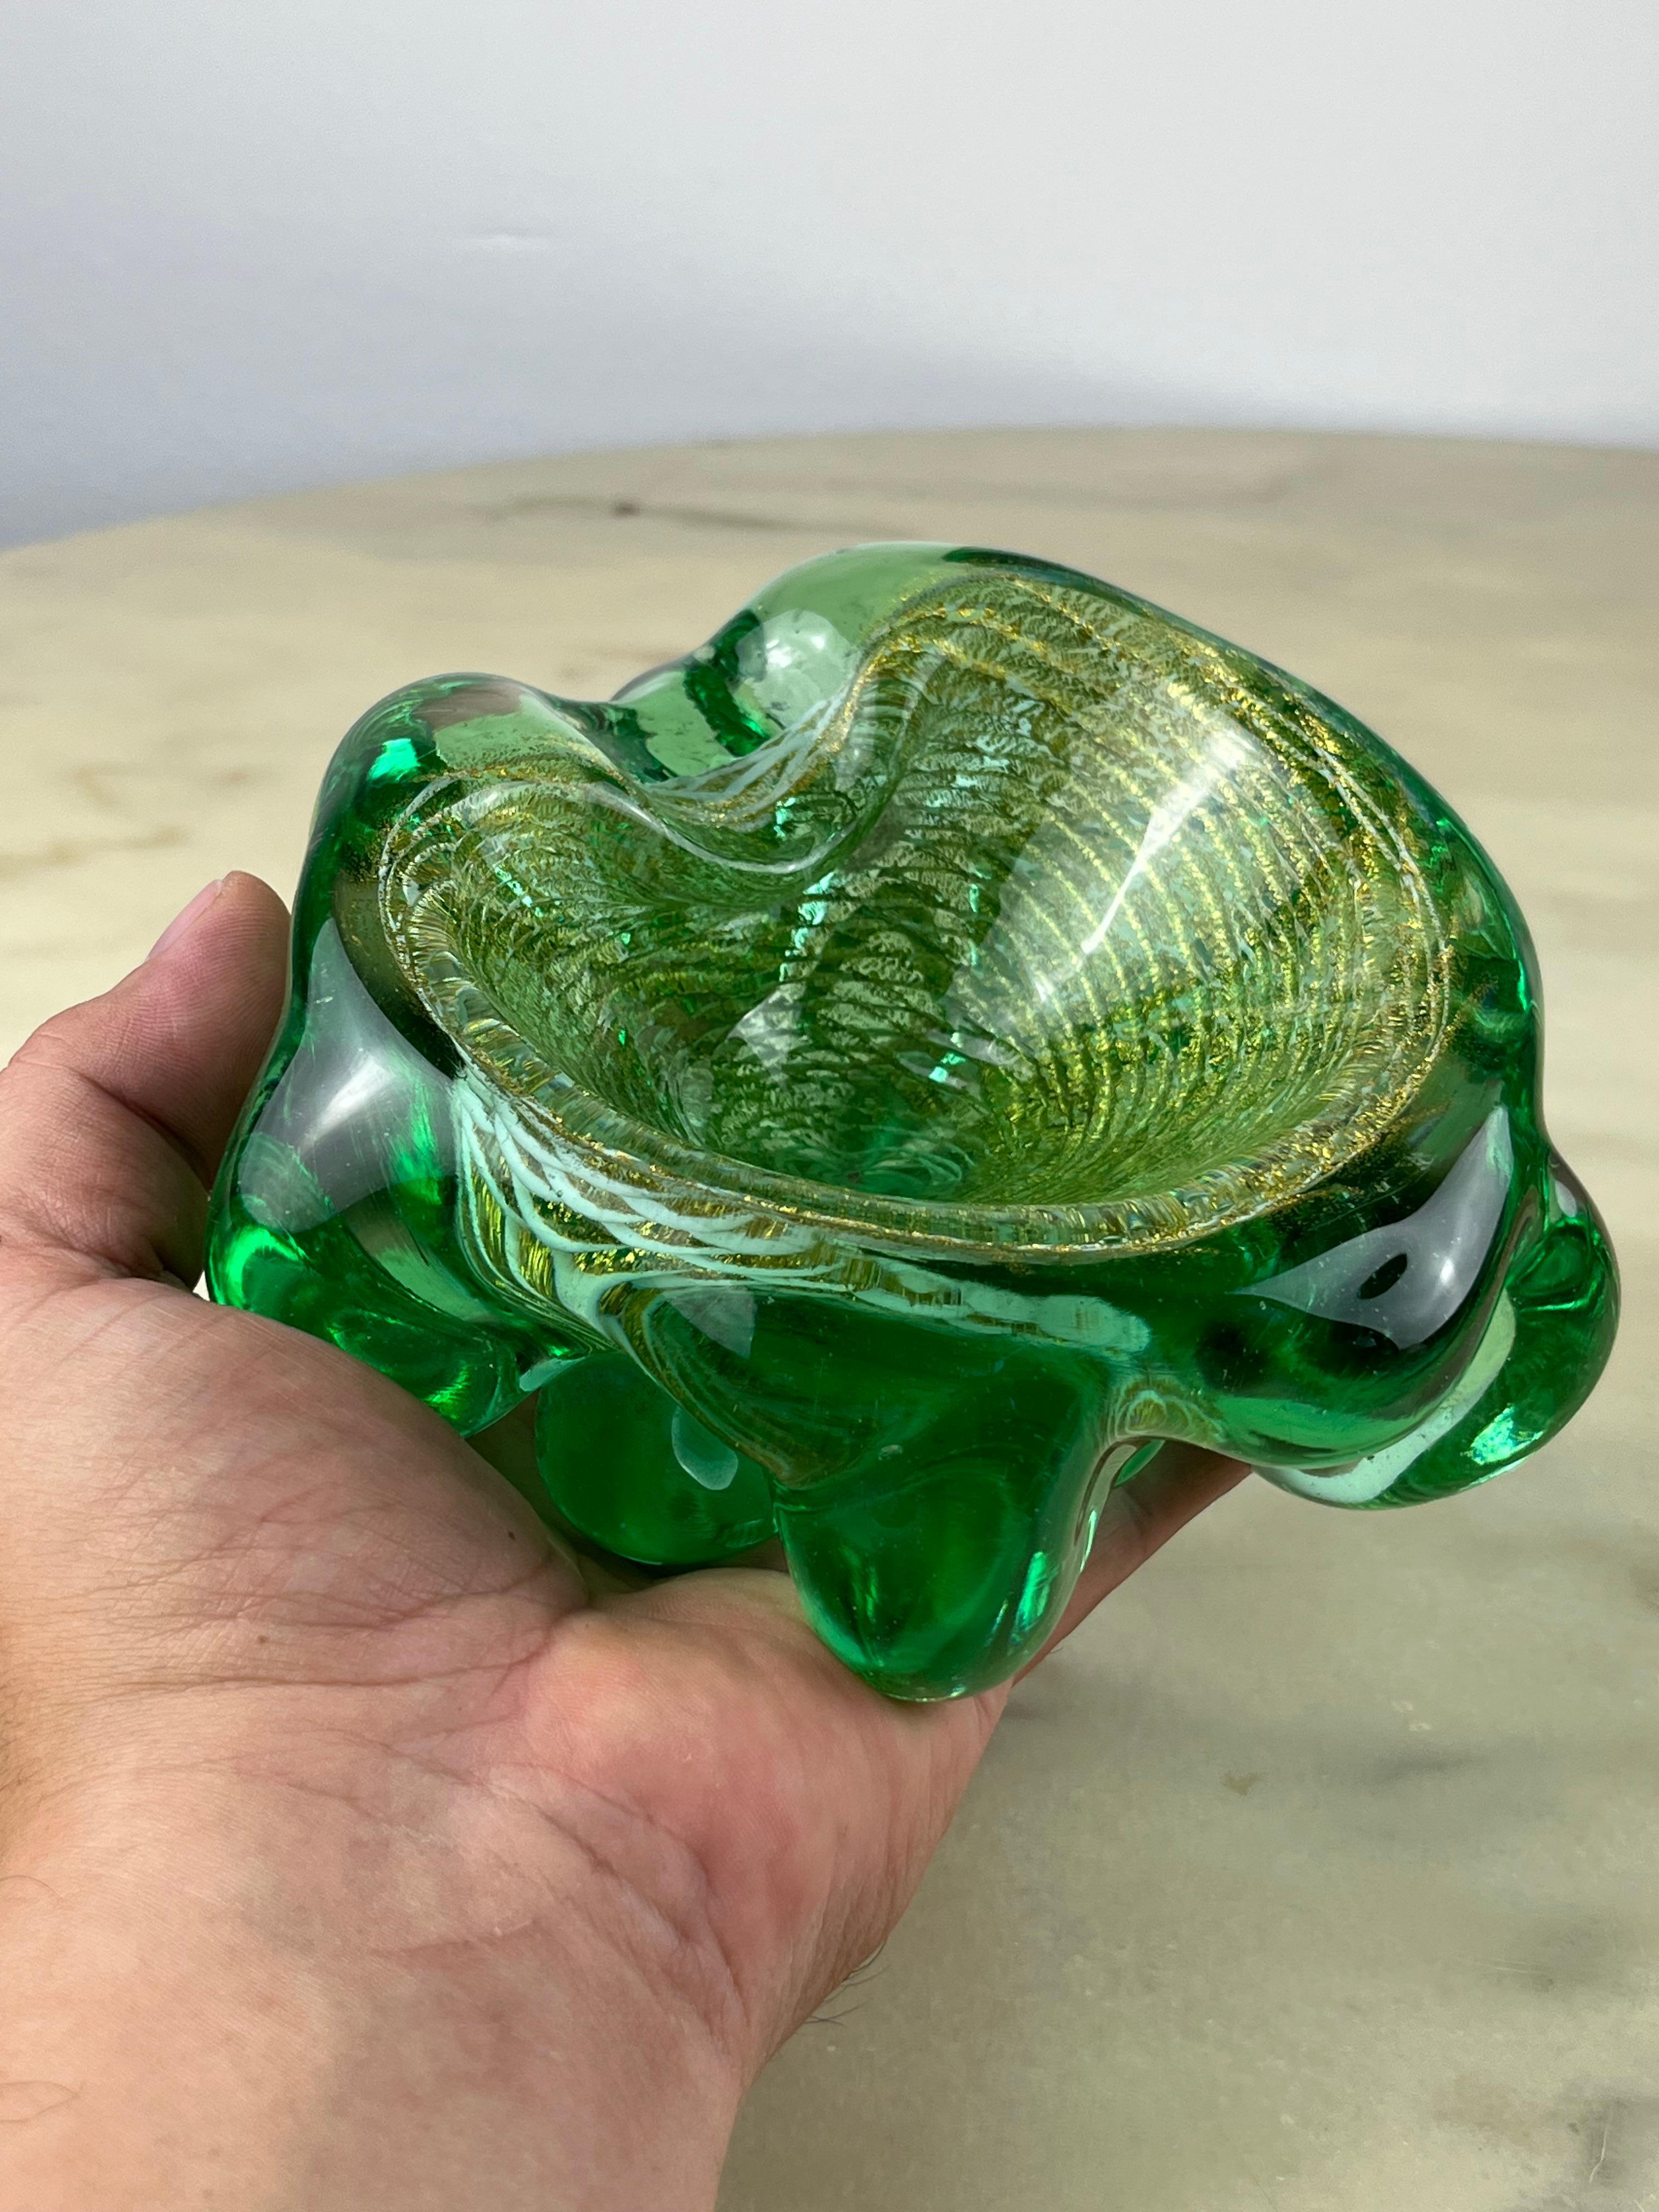 Submerged Murano glass ashtray, attributed to Barovier & Toso, Italy, 1970s, was purchased by my great-grandfather in Venice.
Small signs of the time.
Very rare object to find today.

Barovier & Toso is a Murano glass company in Venice. The